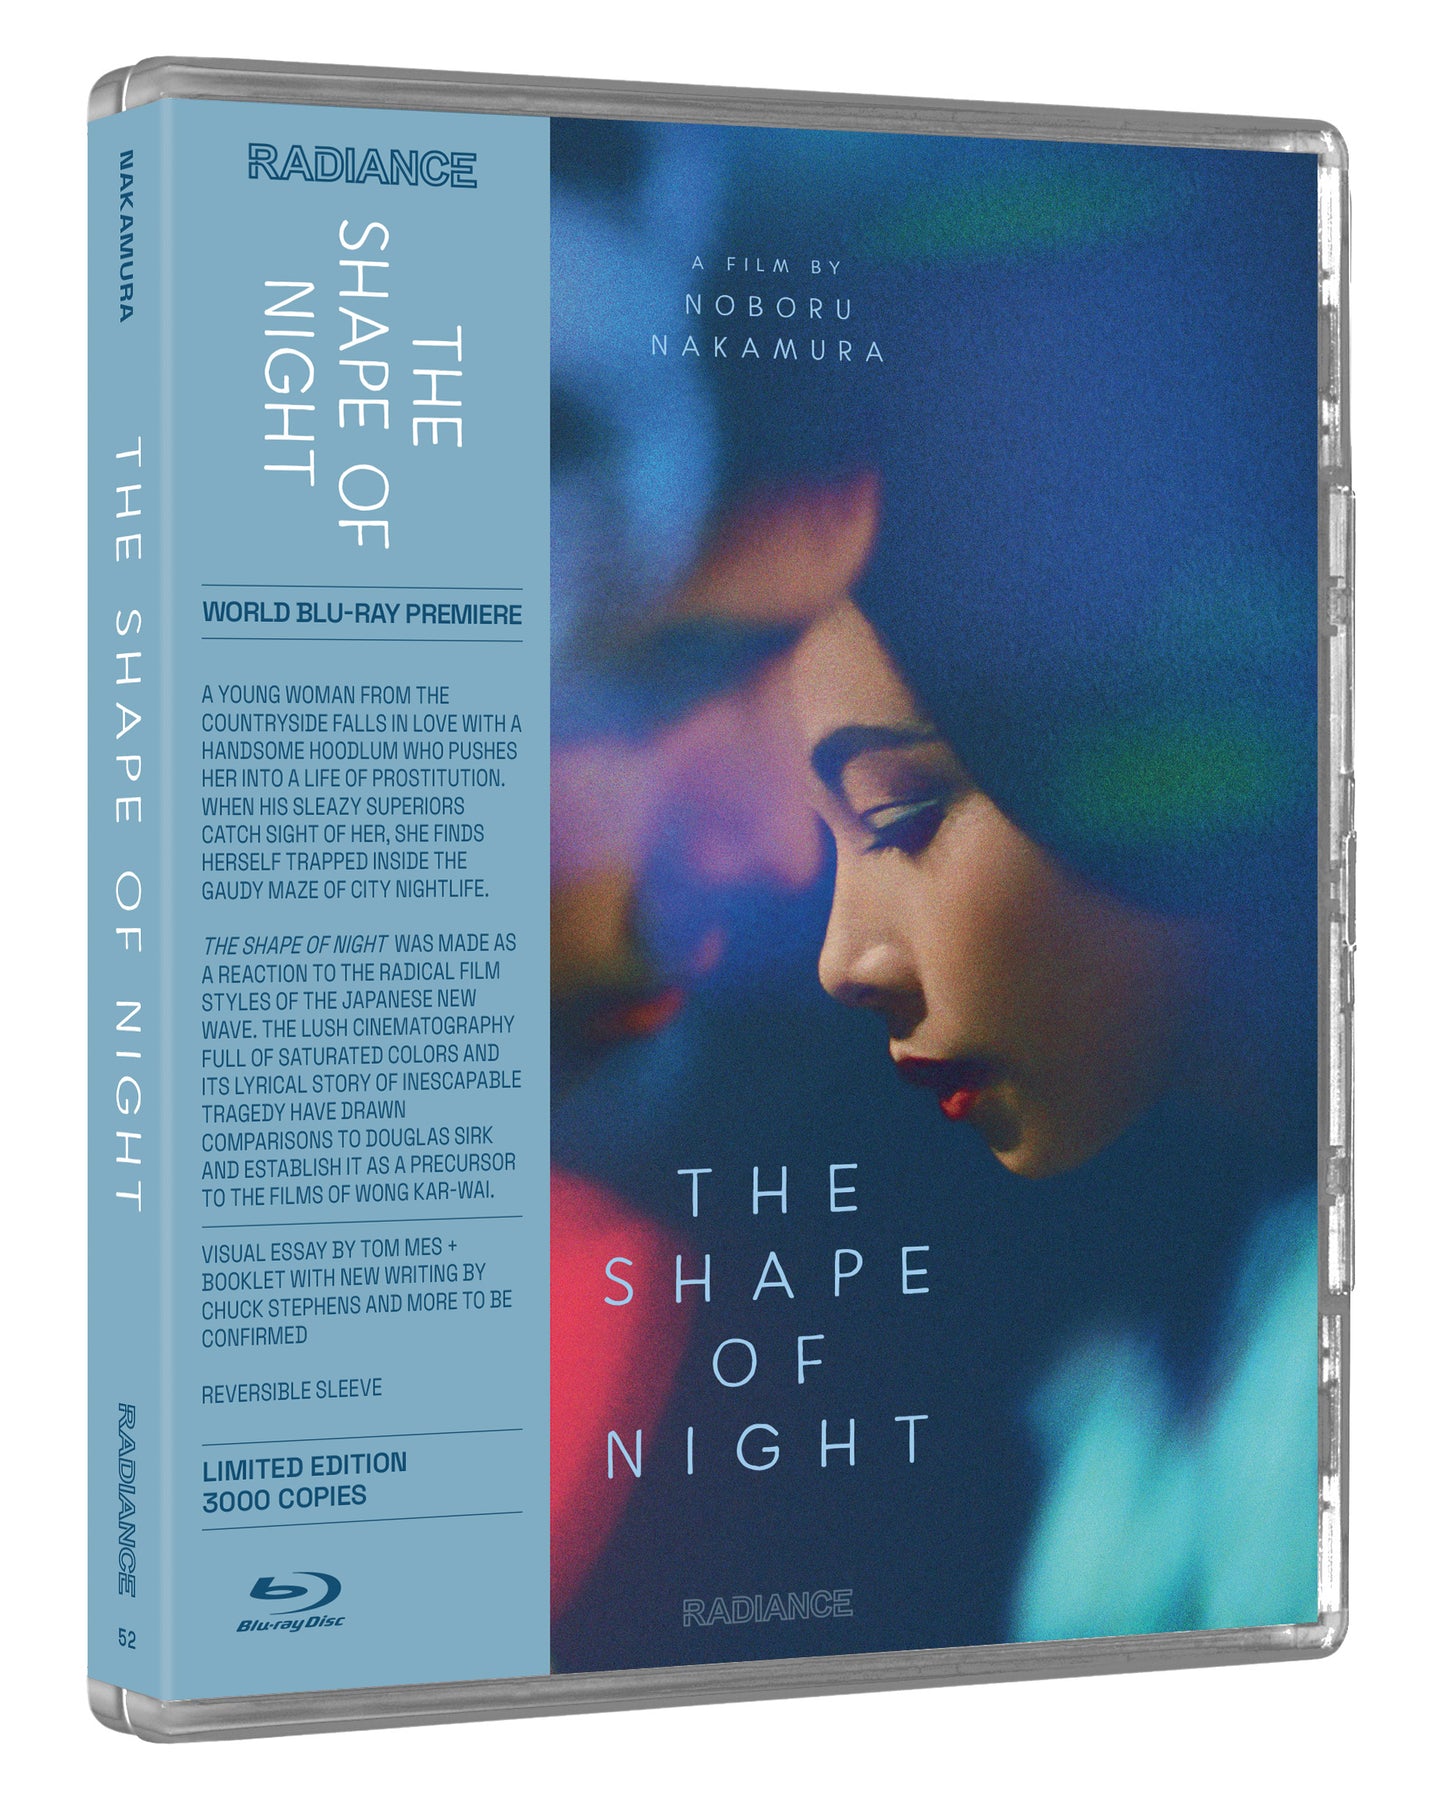 The Shape Of Night Blu-ray Limited Edition (Radiance U.S.) [Preorder]